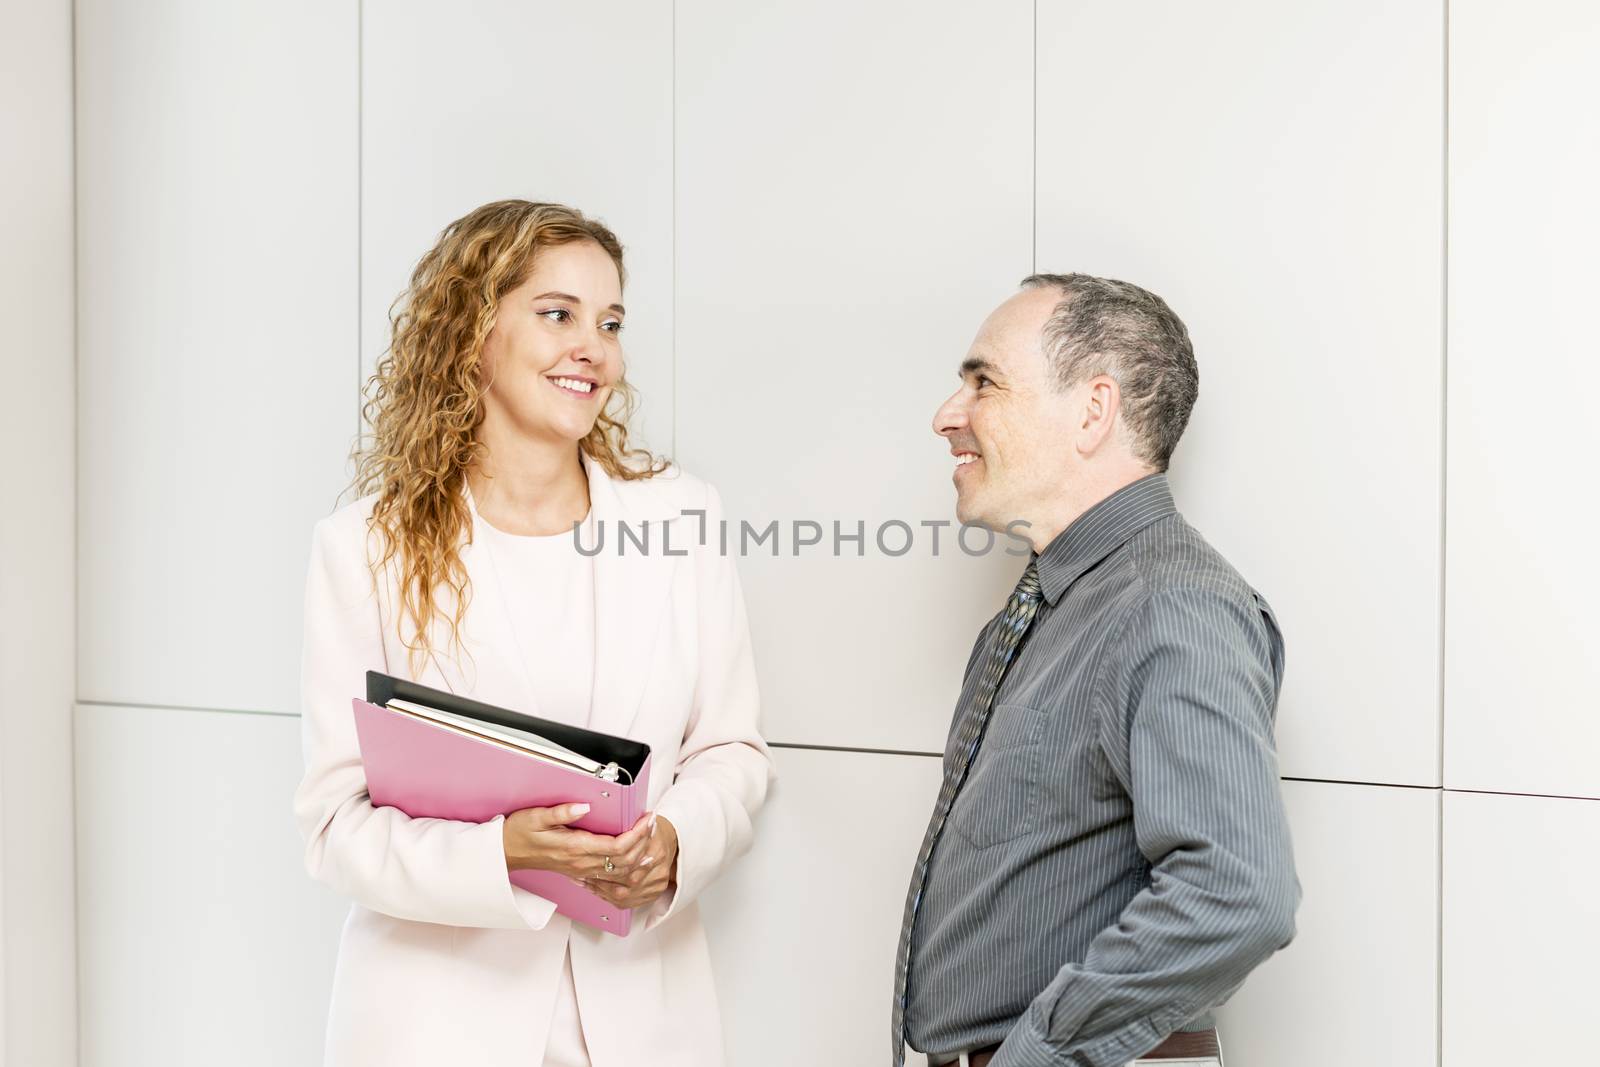 Man and woman discussing work in business office hallway